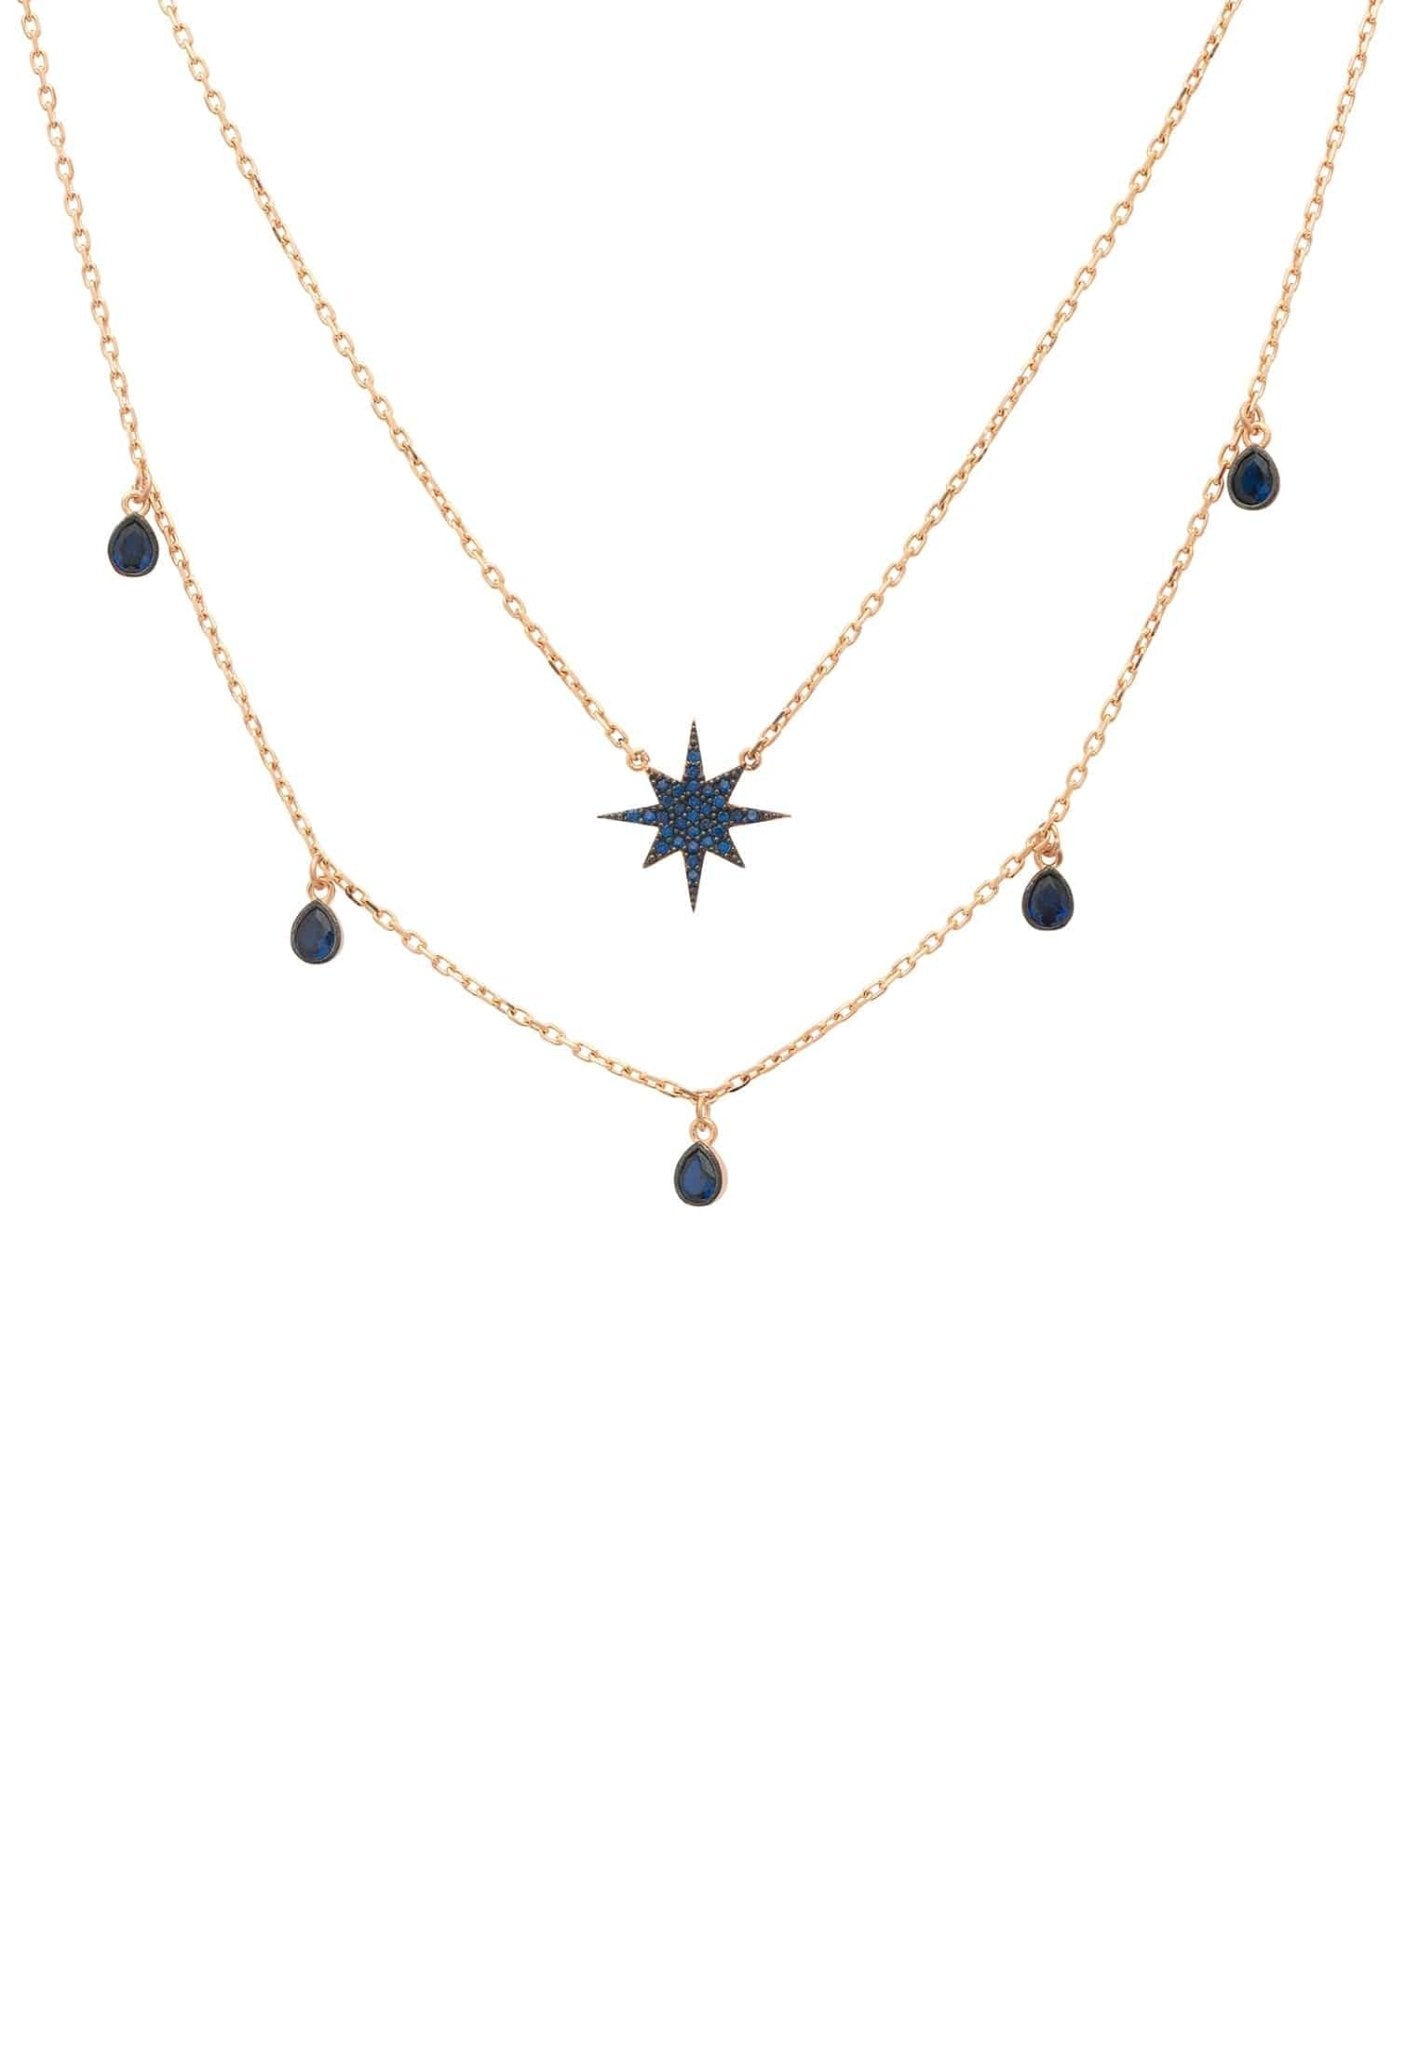 Starburst Double Strand Layered Necklace Rosegold Sapphire Blue - LATELITA Necklaces